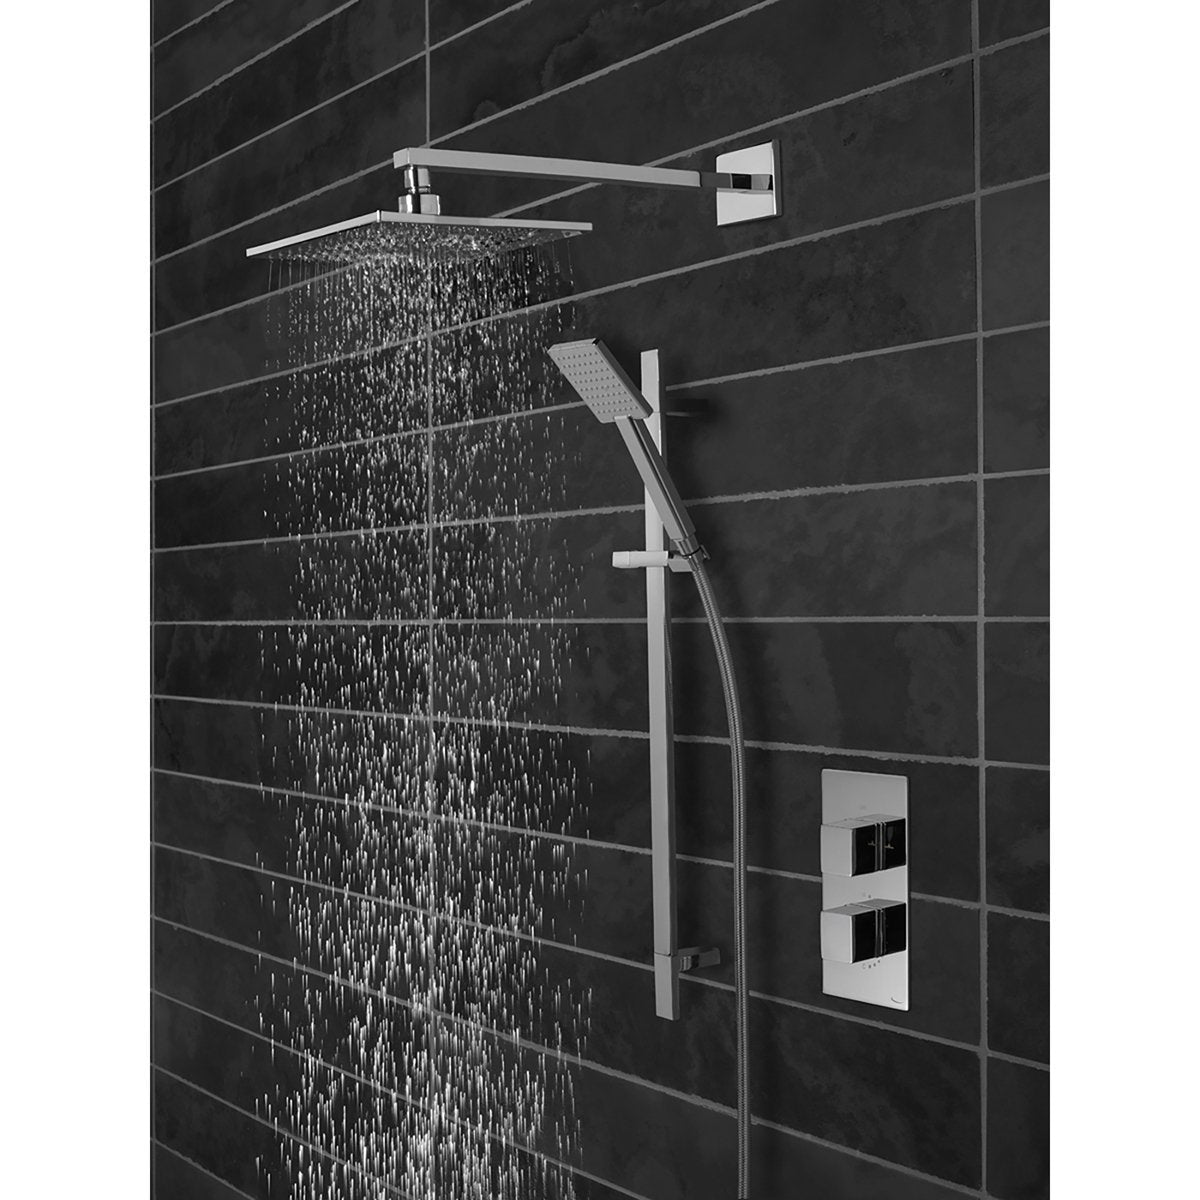 Tavistock Nomad Concealed Two Function Shower - Signature Retail Stores